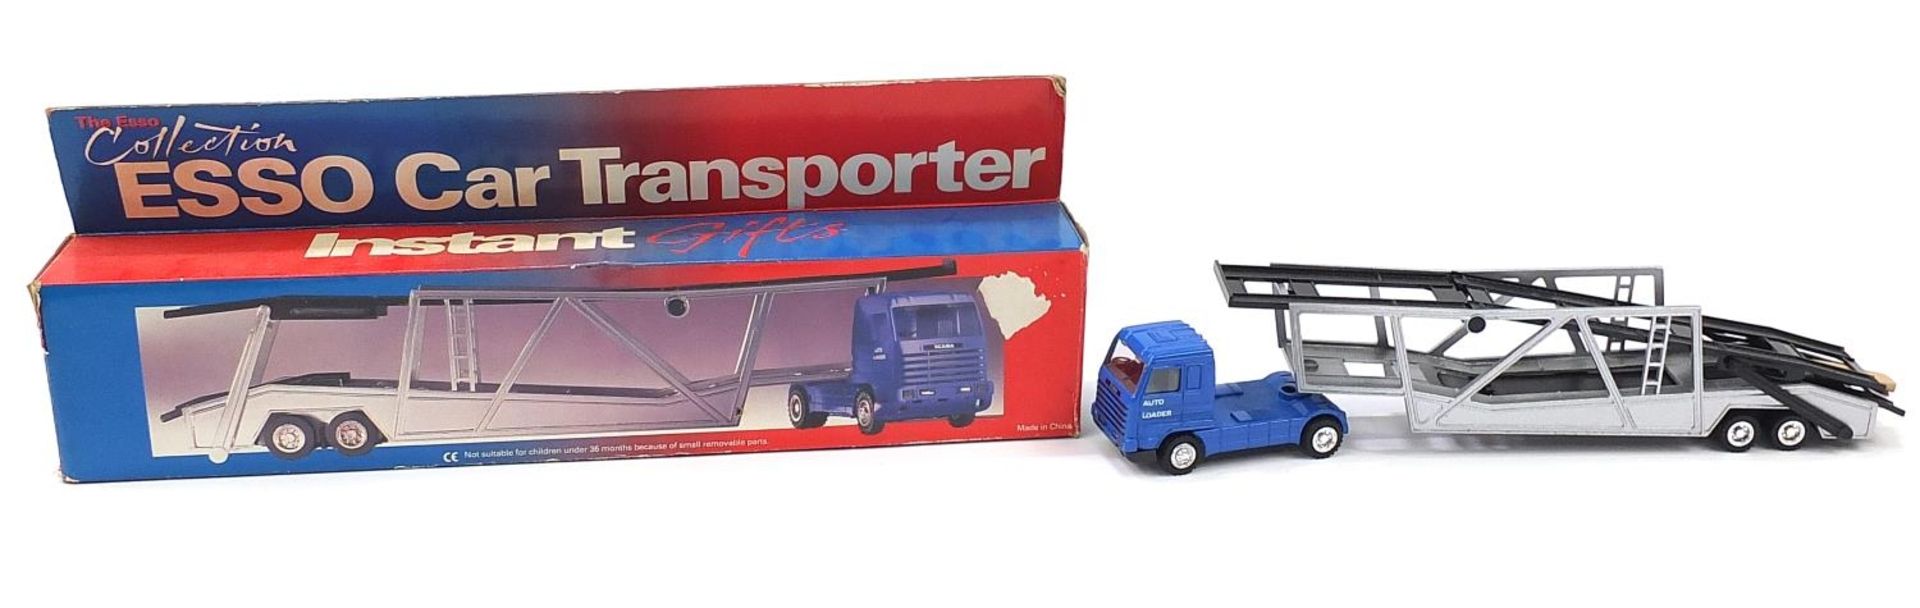 The Esso collection Esso car transporter with box